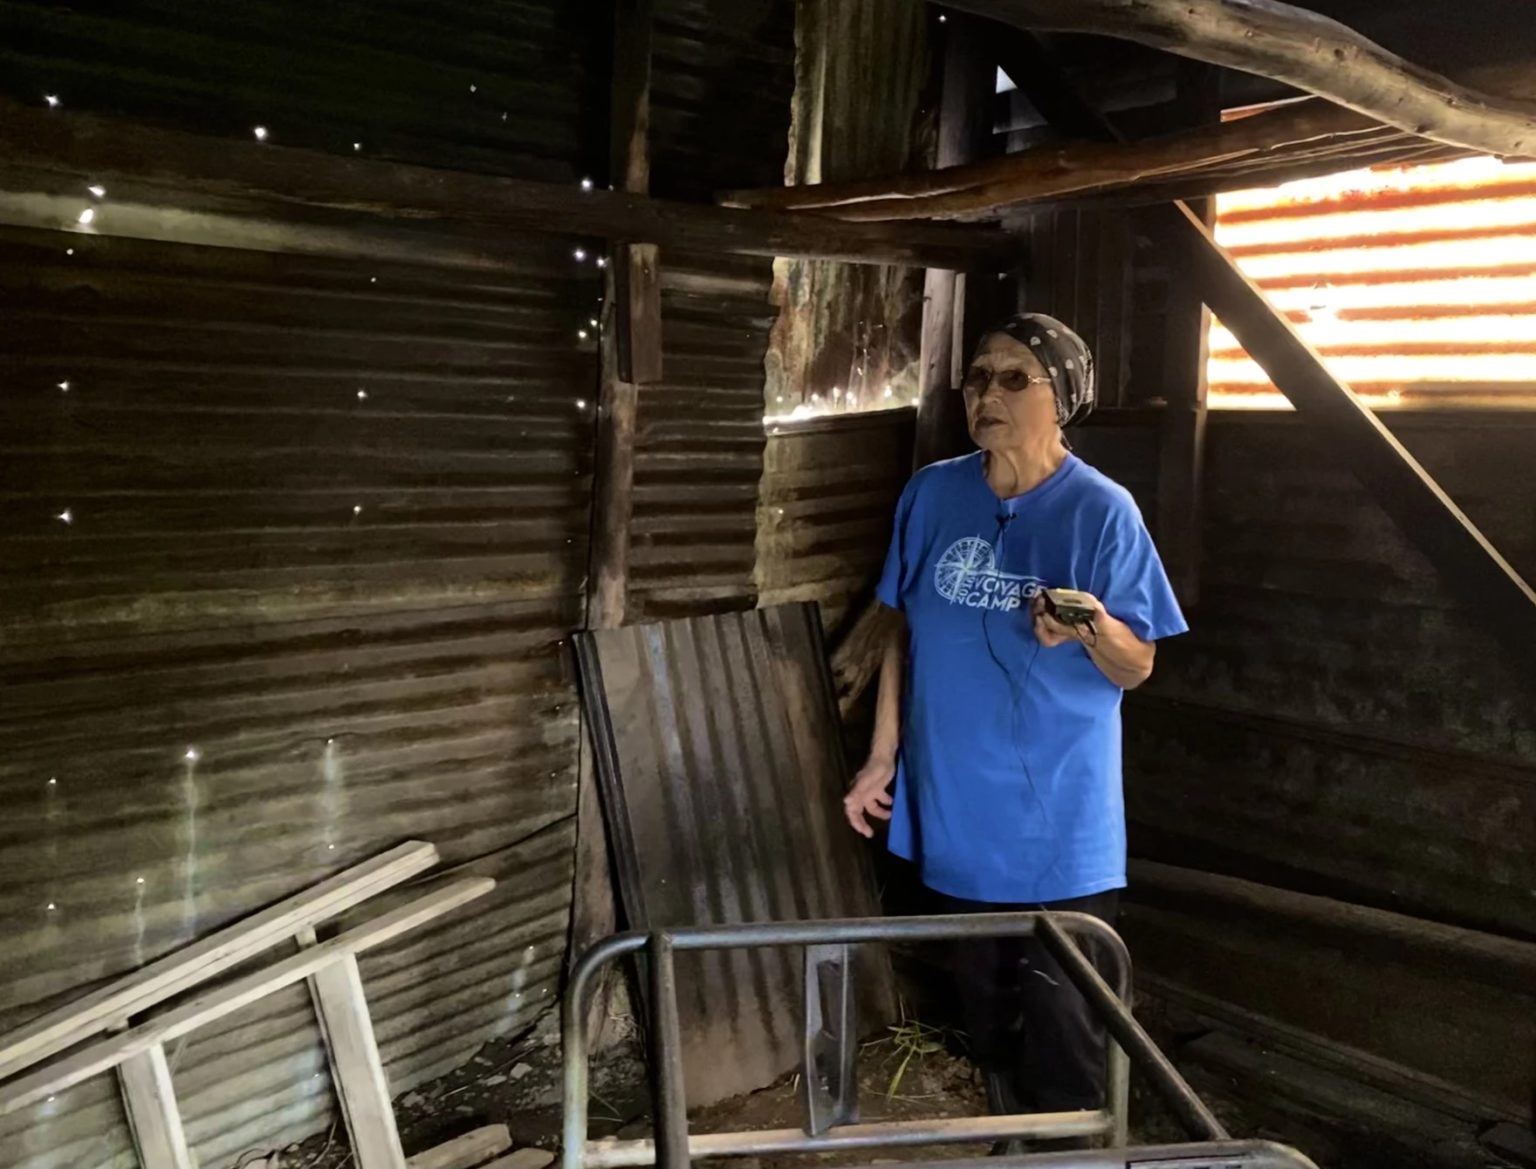 a woman in a blue shirt stands in an empty smokehouse